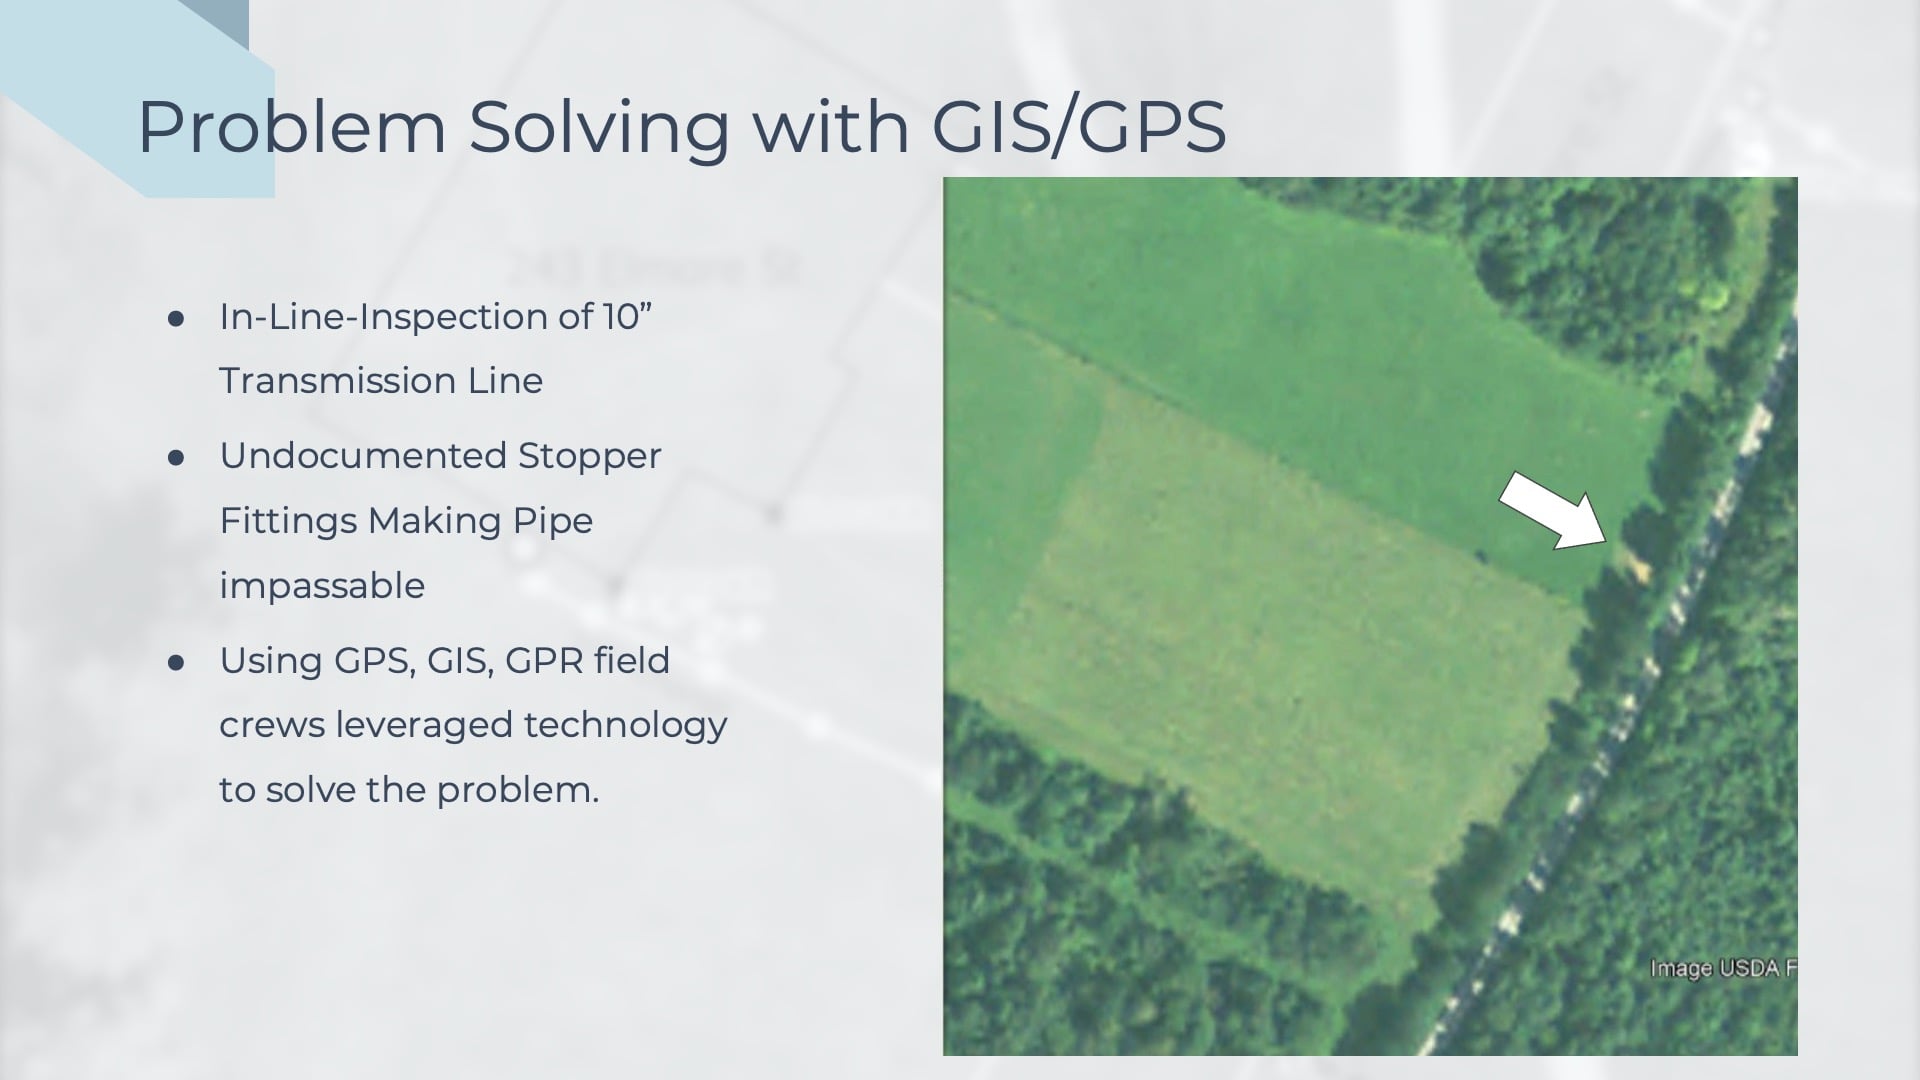 In this slide of the section "Problem Solving with GIS/GPS," an overhead image of the field where they want to locate the asset is displayed. This overhead image is taken from the archives, where they were able to pinpoint a time period where they could see discolored grass in a section of the field. Vermont Gas suspected this is where the original asset had been excavated and the area re-sodded.